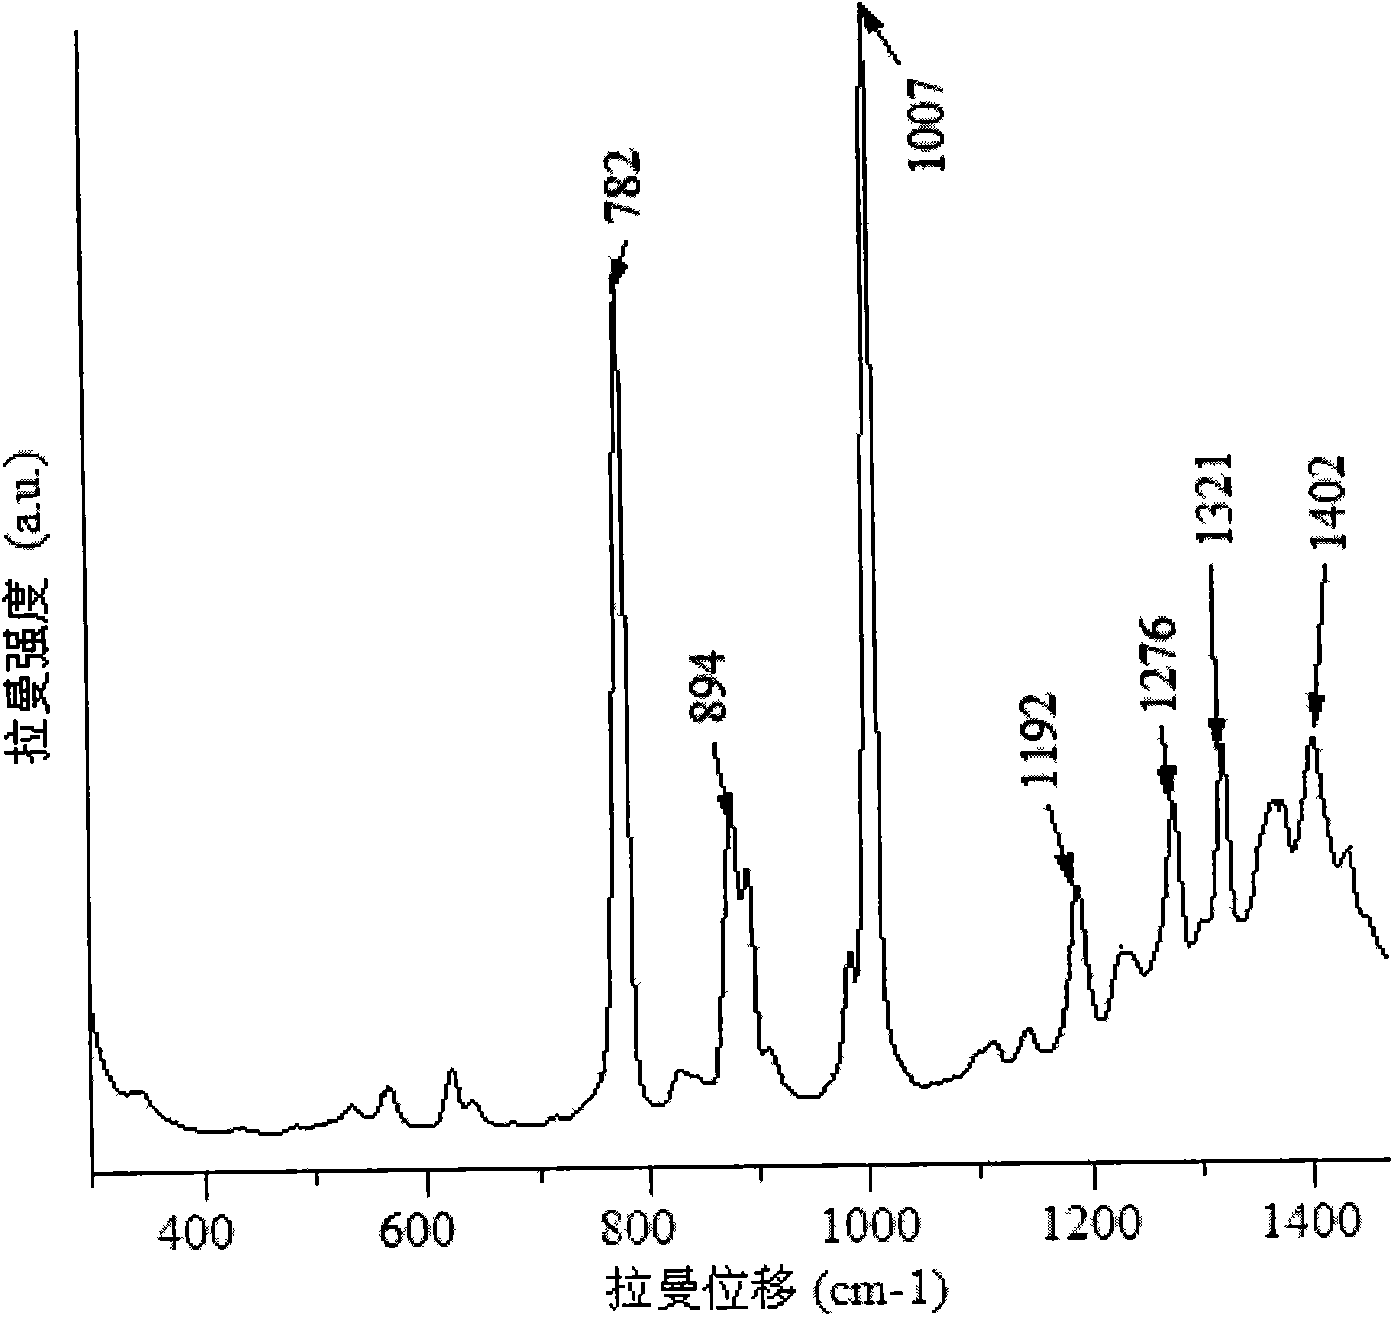 Method for fast detecting surface enhancing Raman spectrums of pesticide residues in tea leaves